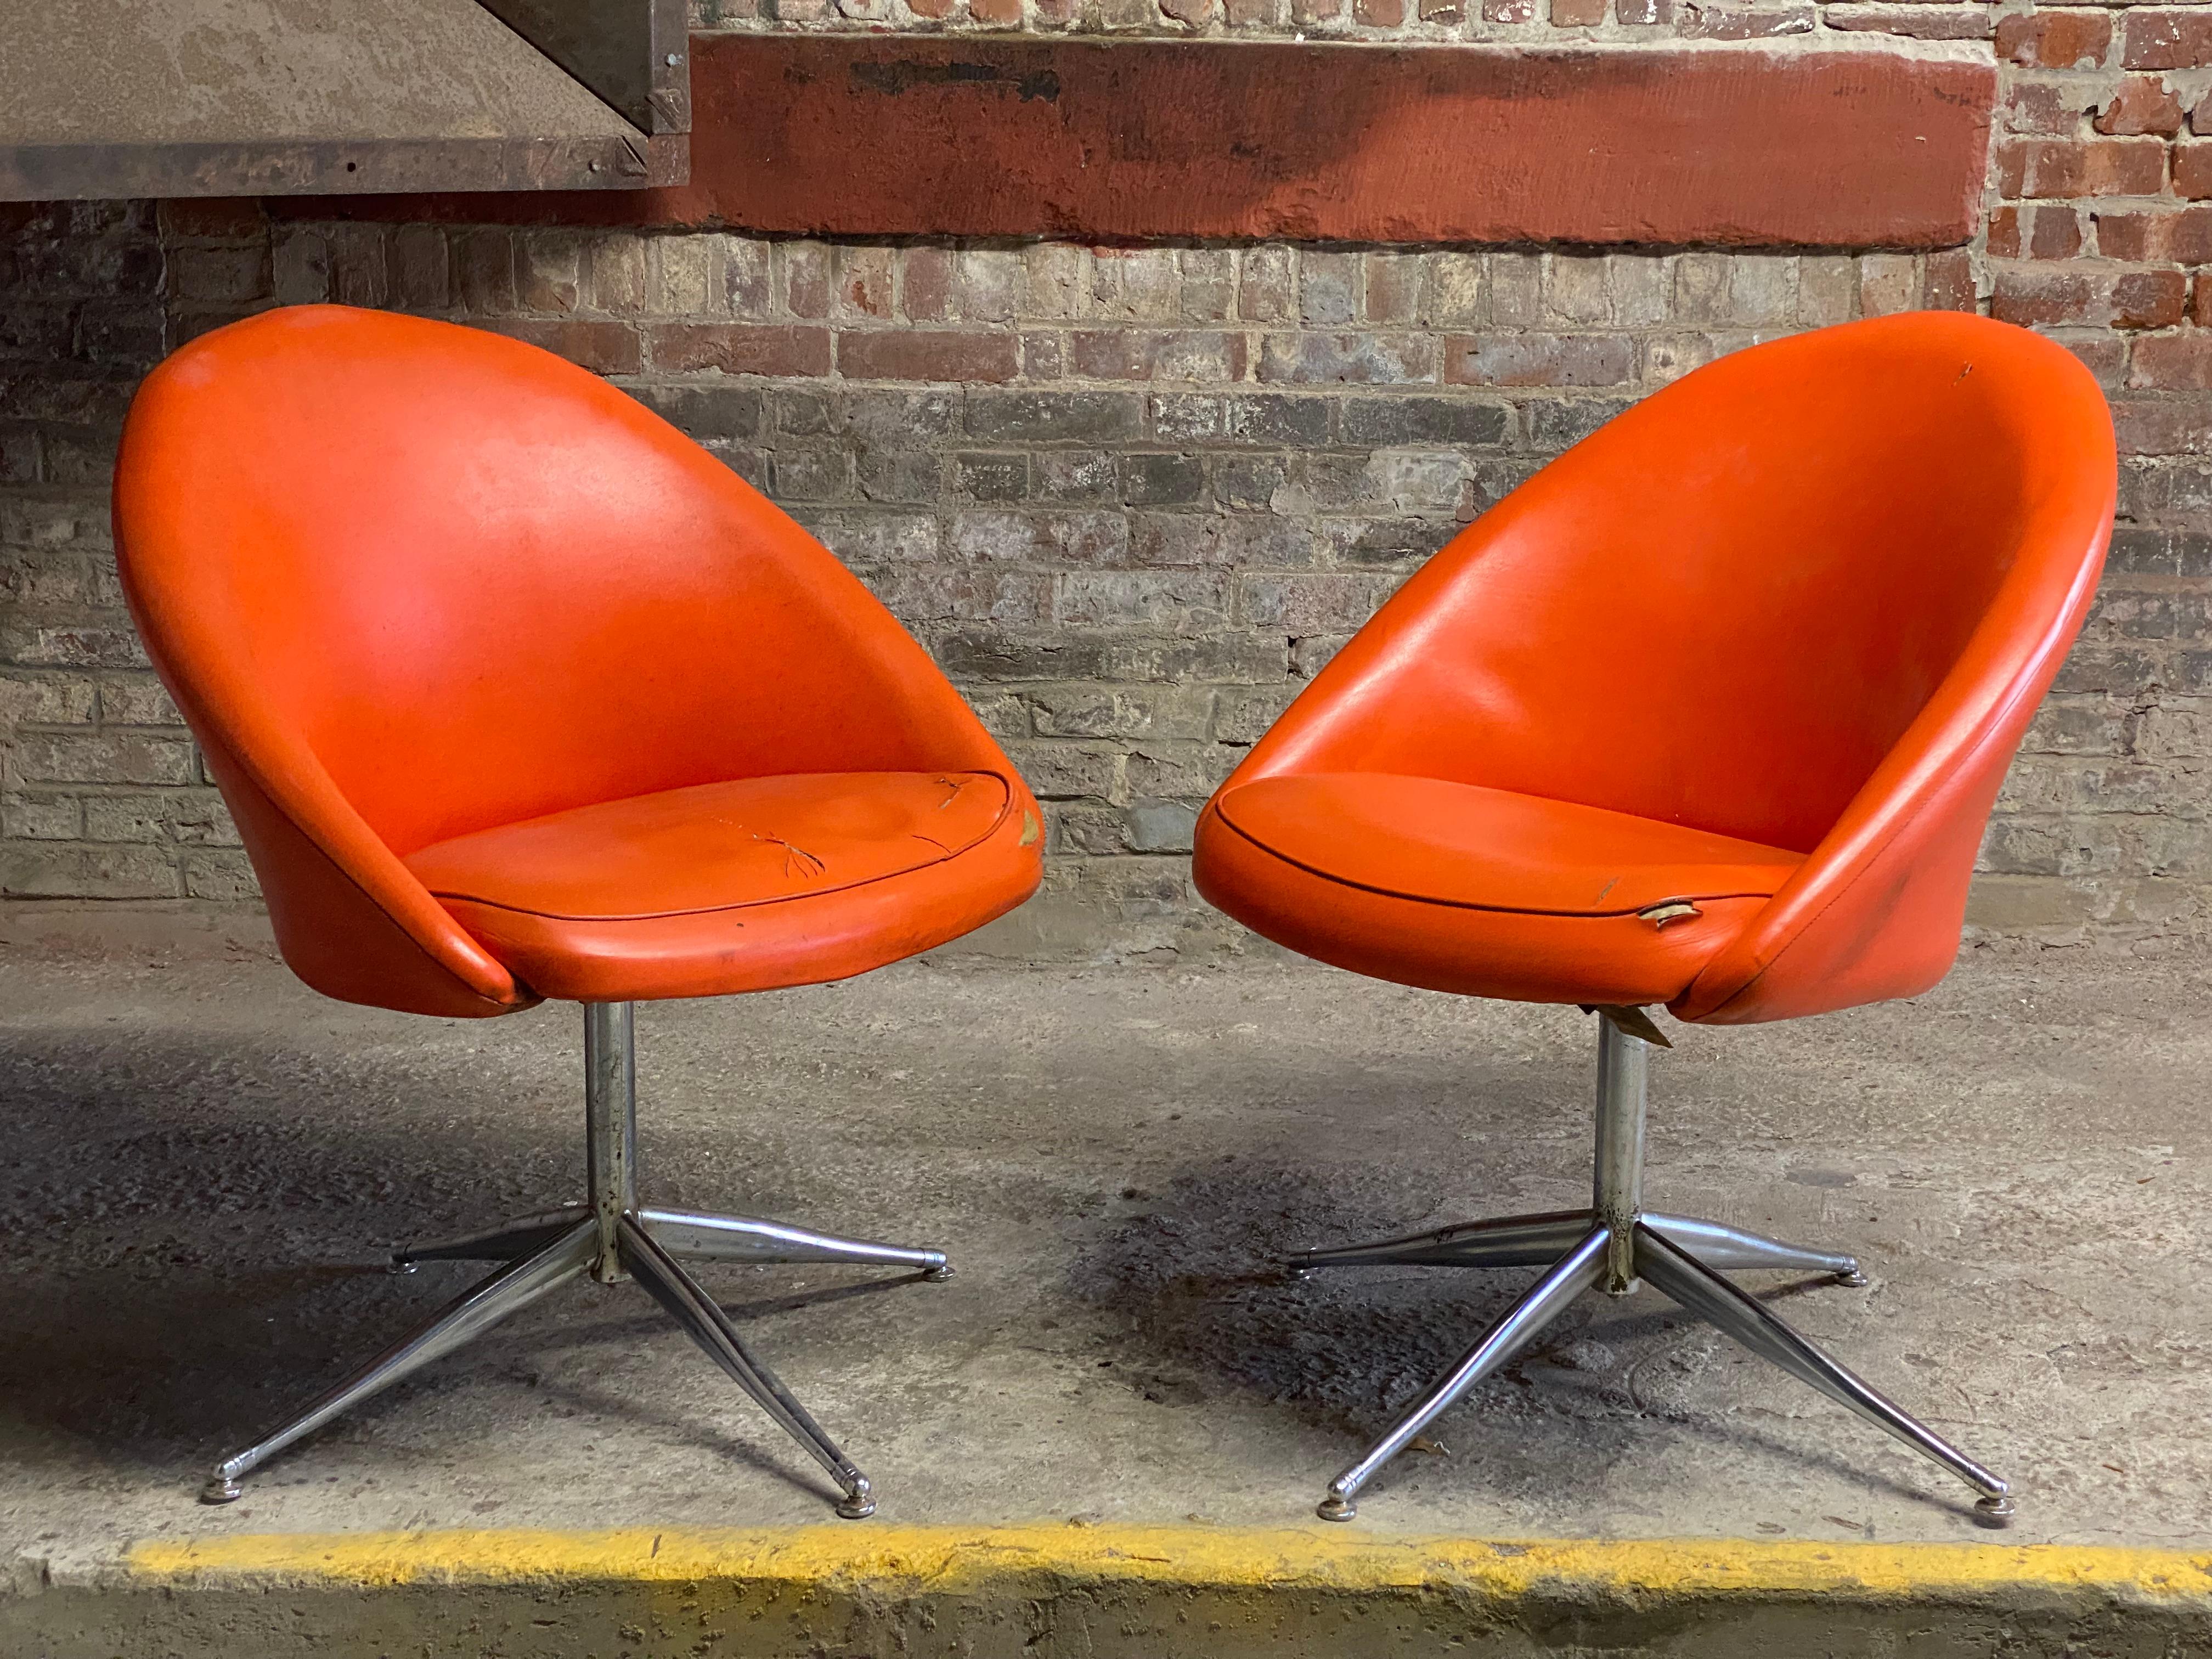 A good pair of Baumritter swivel chairs in orange naugahyde and chrome star bases. Circa 1960-70. Both examples have the Viko by Baumritter signature and model number, 836202. Structurally sound and sturdy construction. They swivel with ease and do